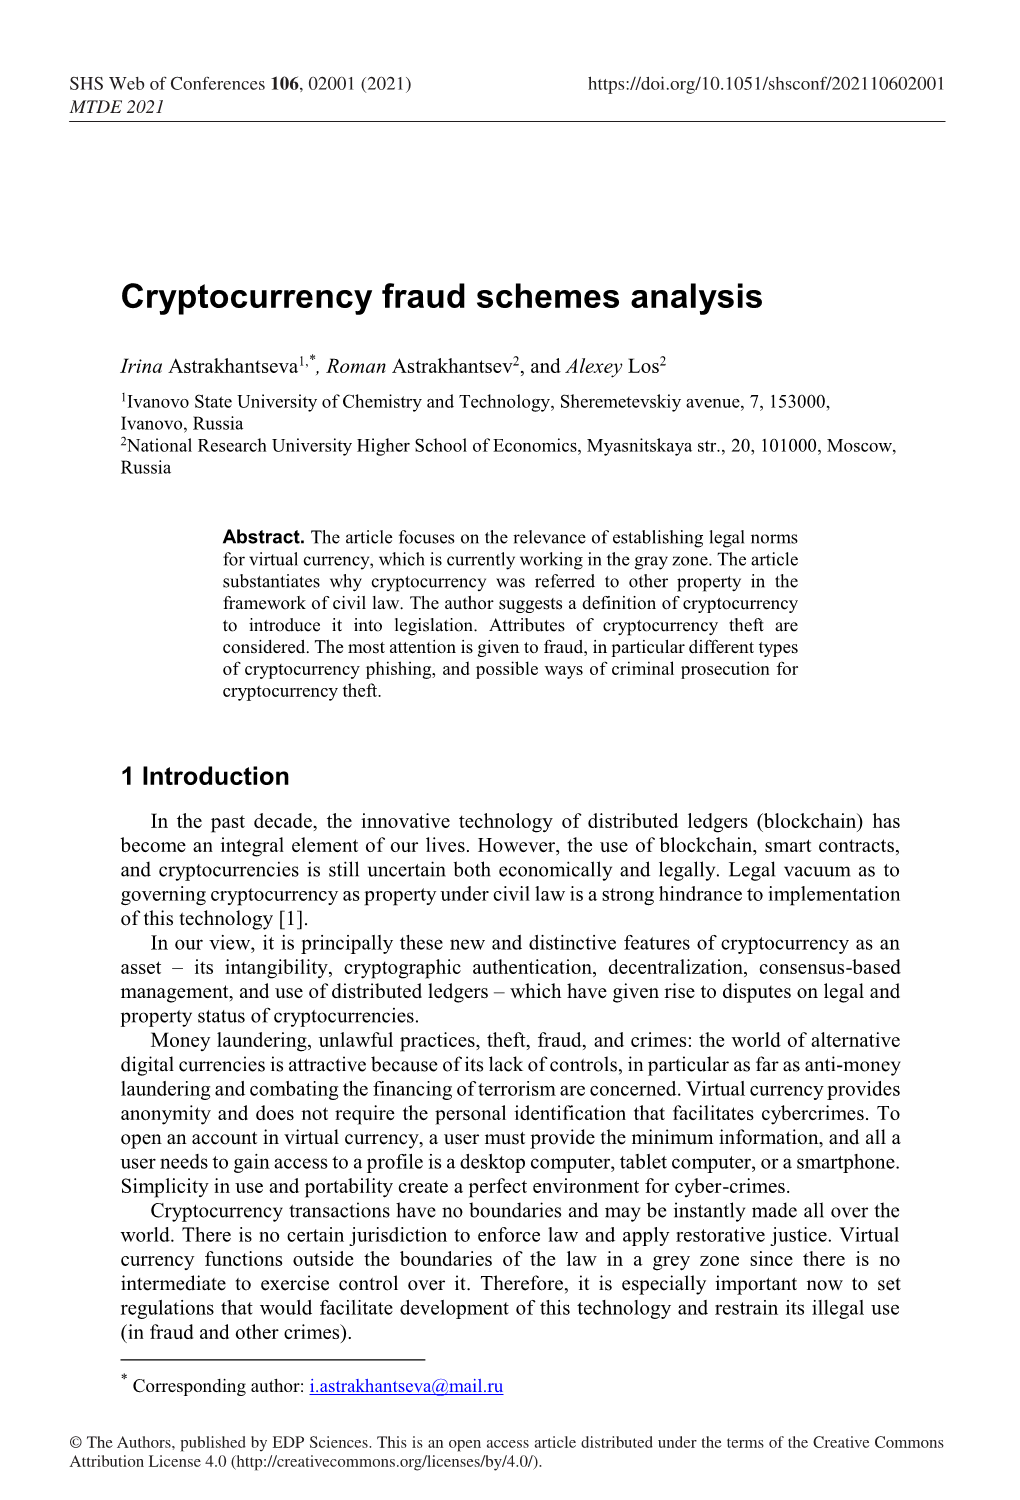 Cryptocurrency Fraud Schemes Analysis